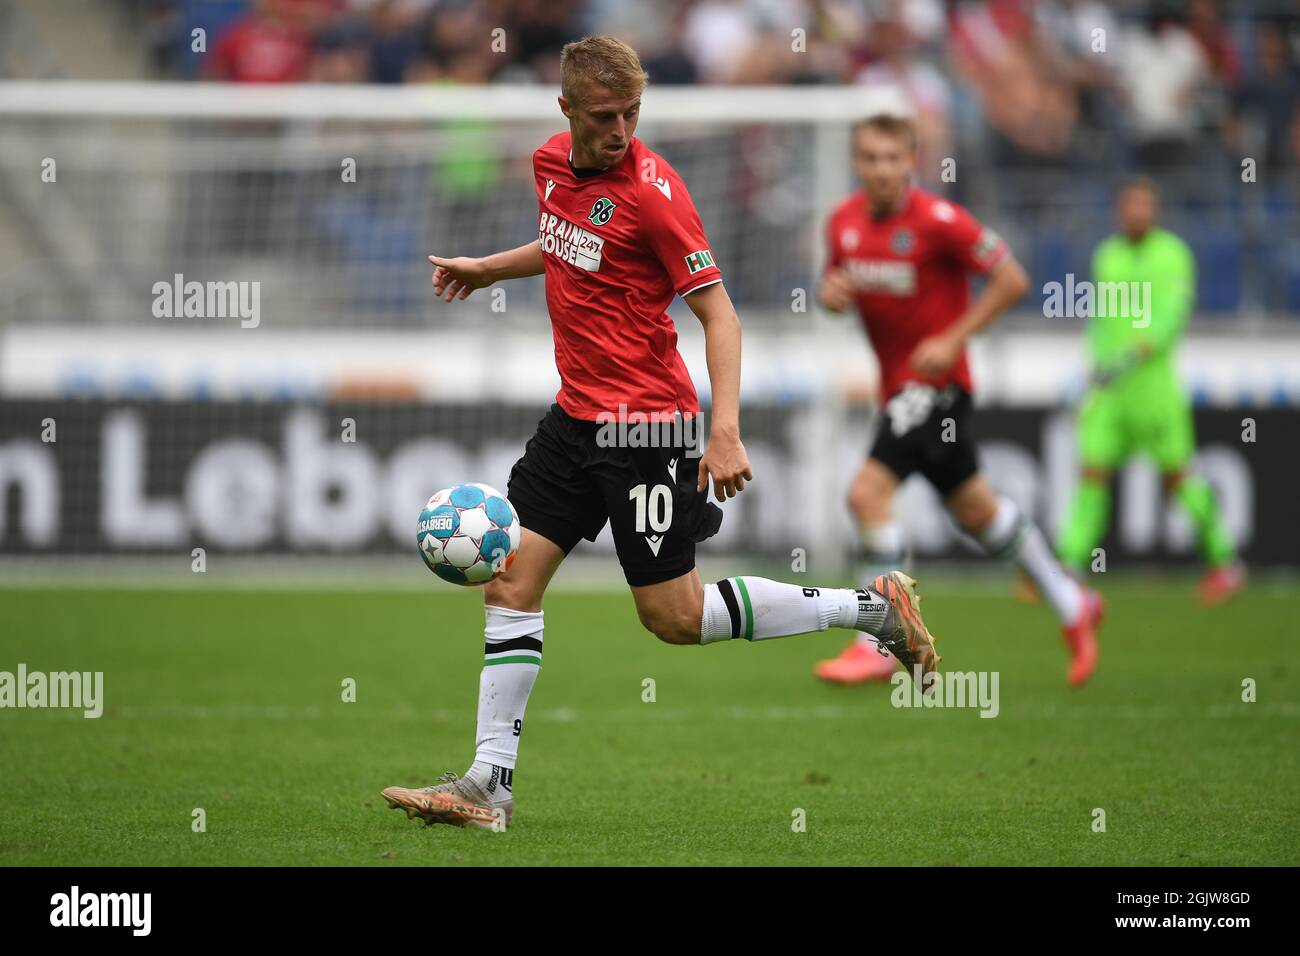 Hanover, Germany. 11th Sep, 2021. Football: 2. Bundesliga, Hannover 96 - FC St. Pauli, Matchday 6 at HDI Arena. Hannover's Sebastian Ernst controls the ball. Credit: Swen Pförtner/dpa - IMPORTANT NOTE: In accordance with the regulations of the DFL Deutsche Fußball Liga and/or the DFB Deutscher Fußball-Bund, it is prohibited to use or have used photographs taken in the stadium and/or of the match in the form of sequence pictures and/or video-like photo series./dpa/Alamy Live News Stock Photo